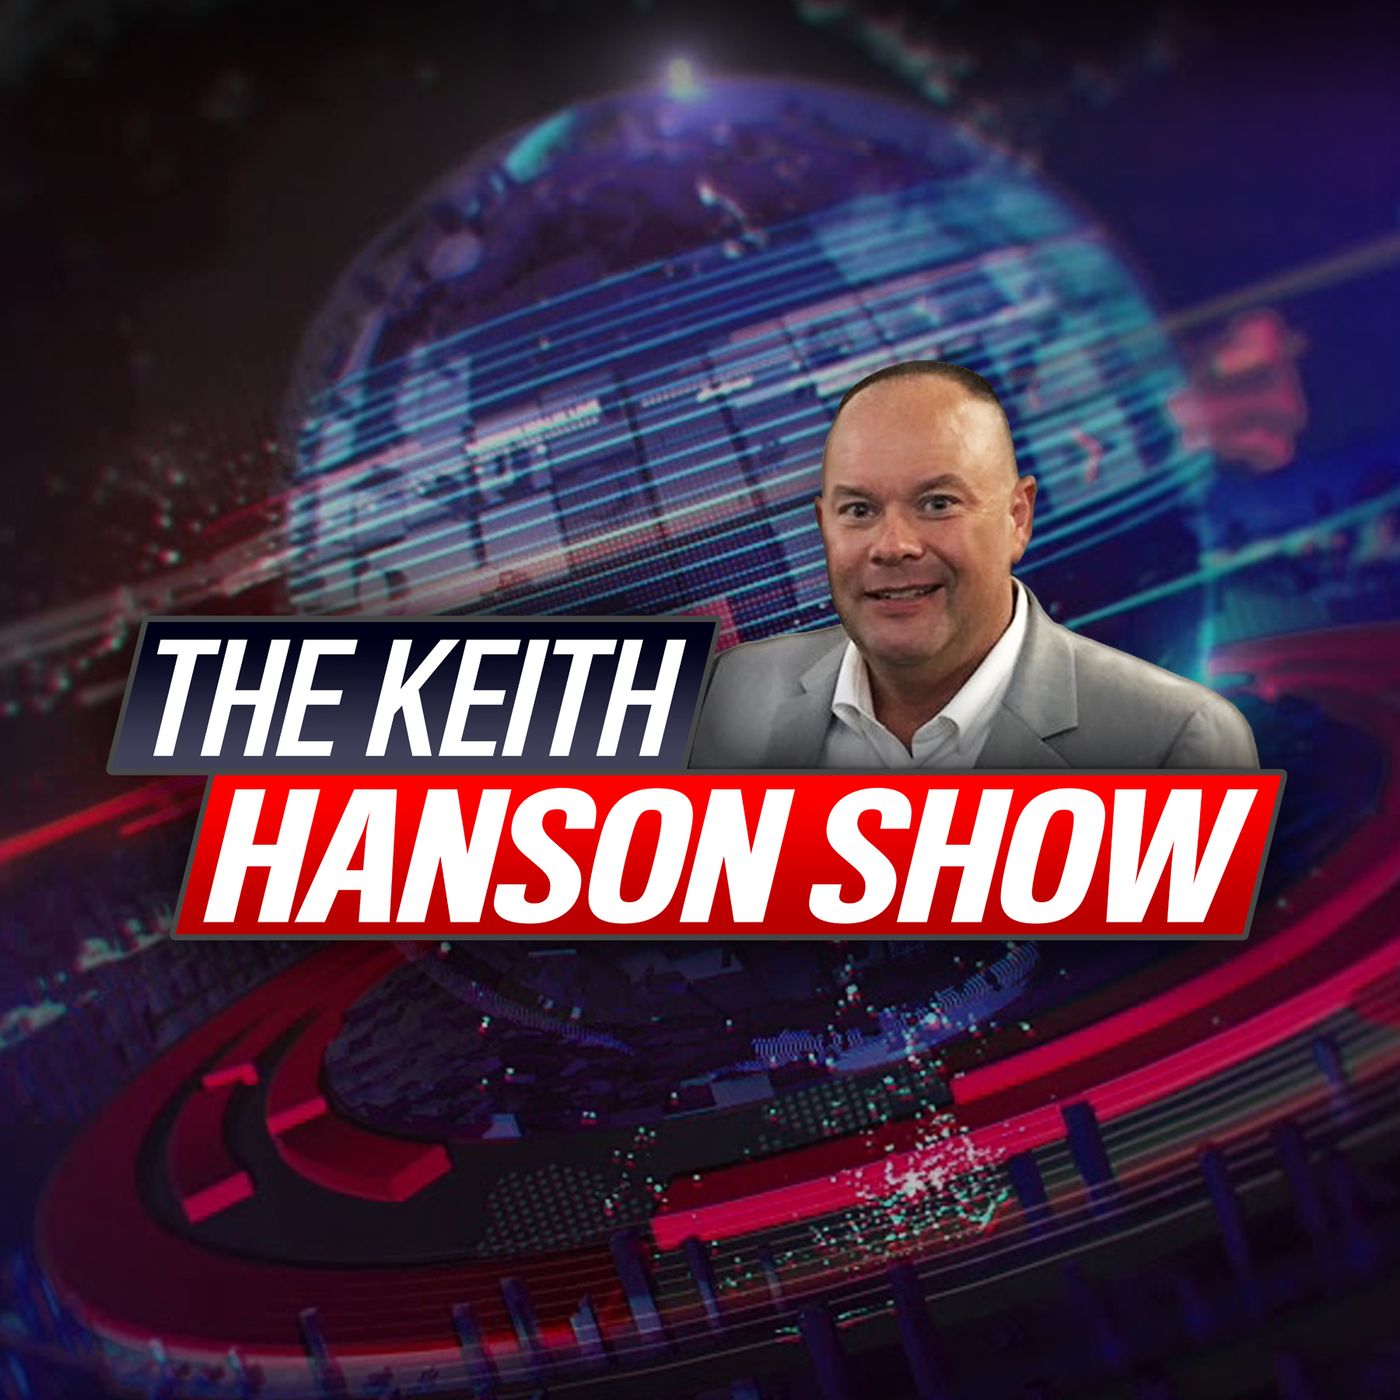 The Keith Hanson Show - April 22, 2021 (#857) - Dan Wos on Police Shootings and Second Amendment